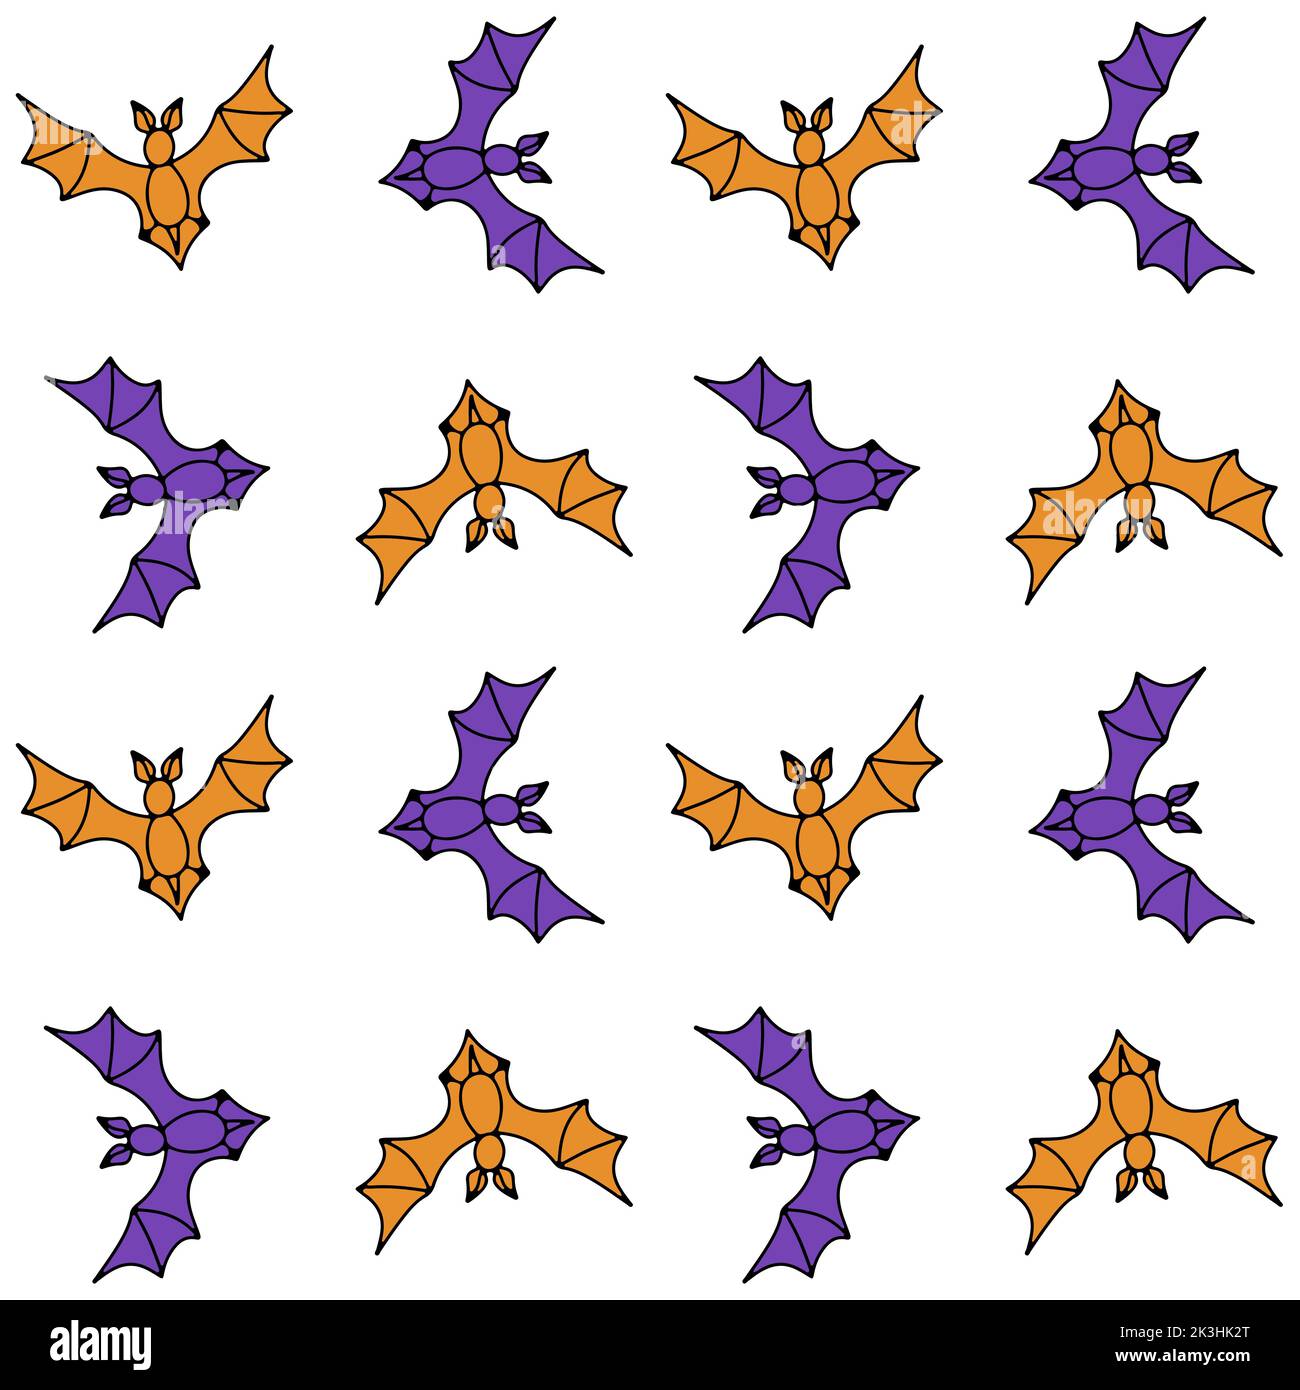 Halloween seamless pattern with purple and orange flying bat silhouettes on white background Stock Vector